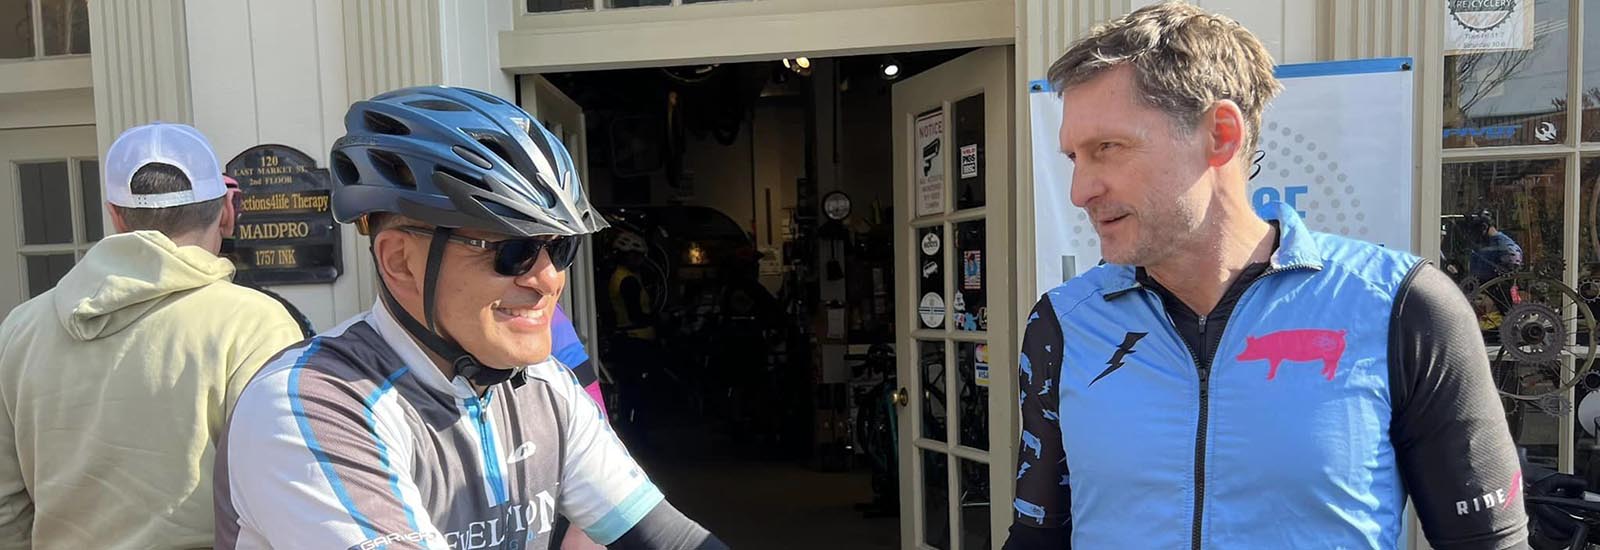 Image of two VeloPigs talking about the great gravel bike ride they just rode.